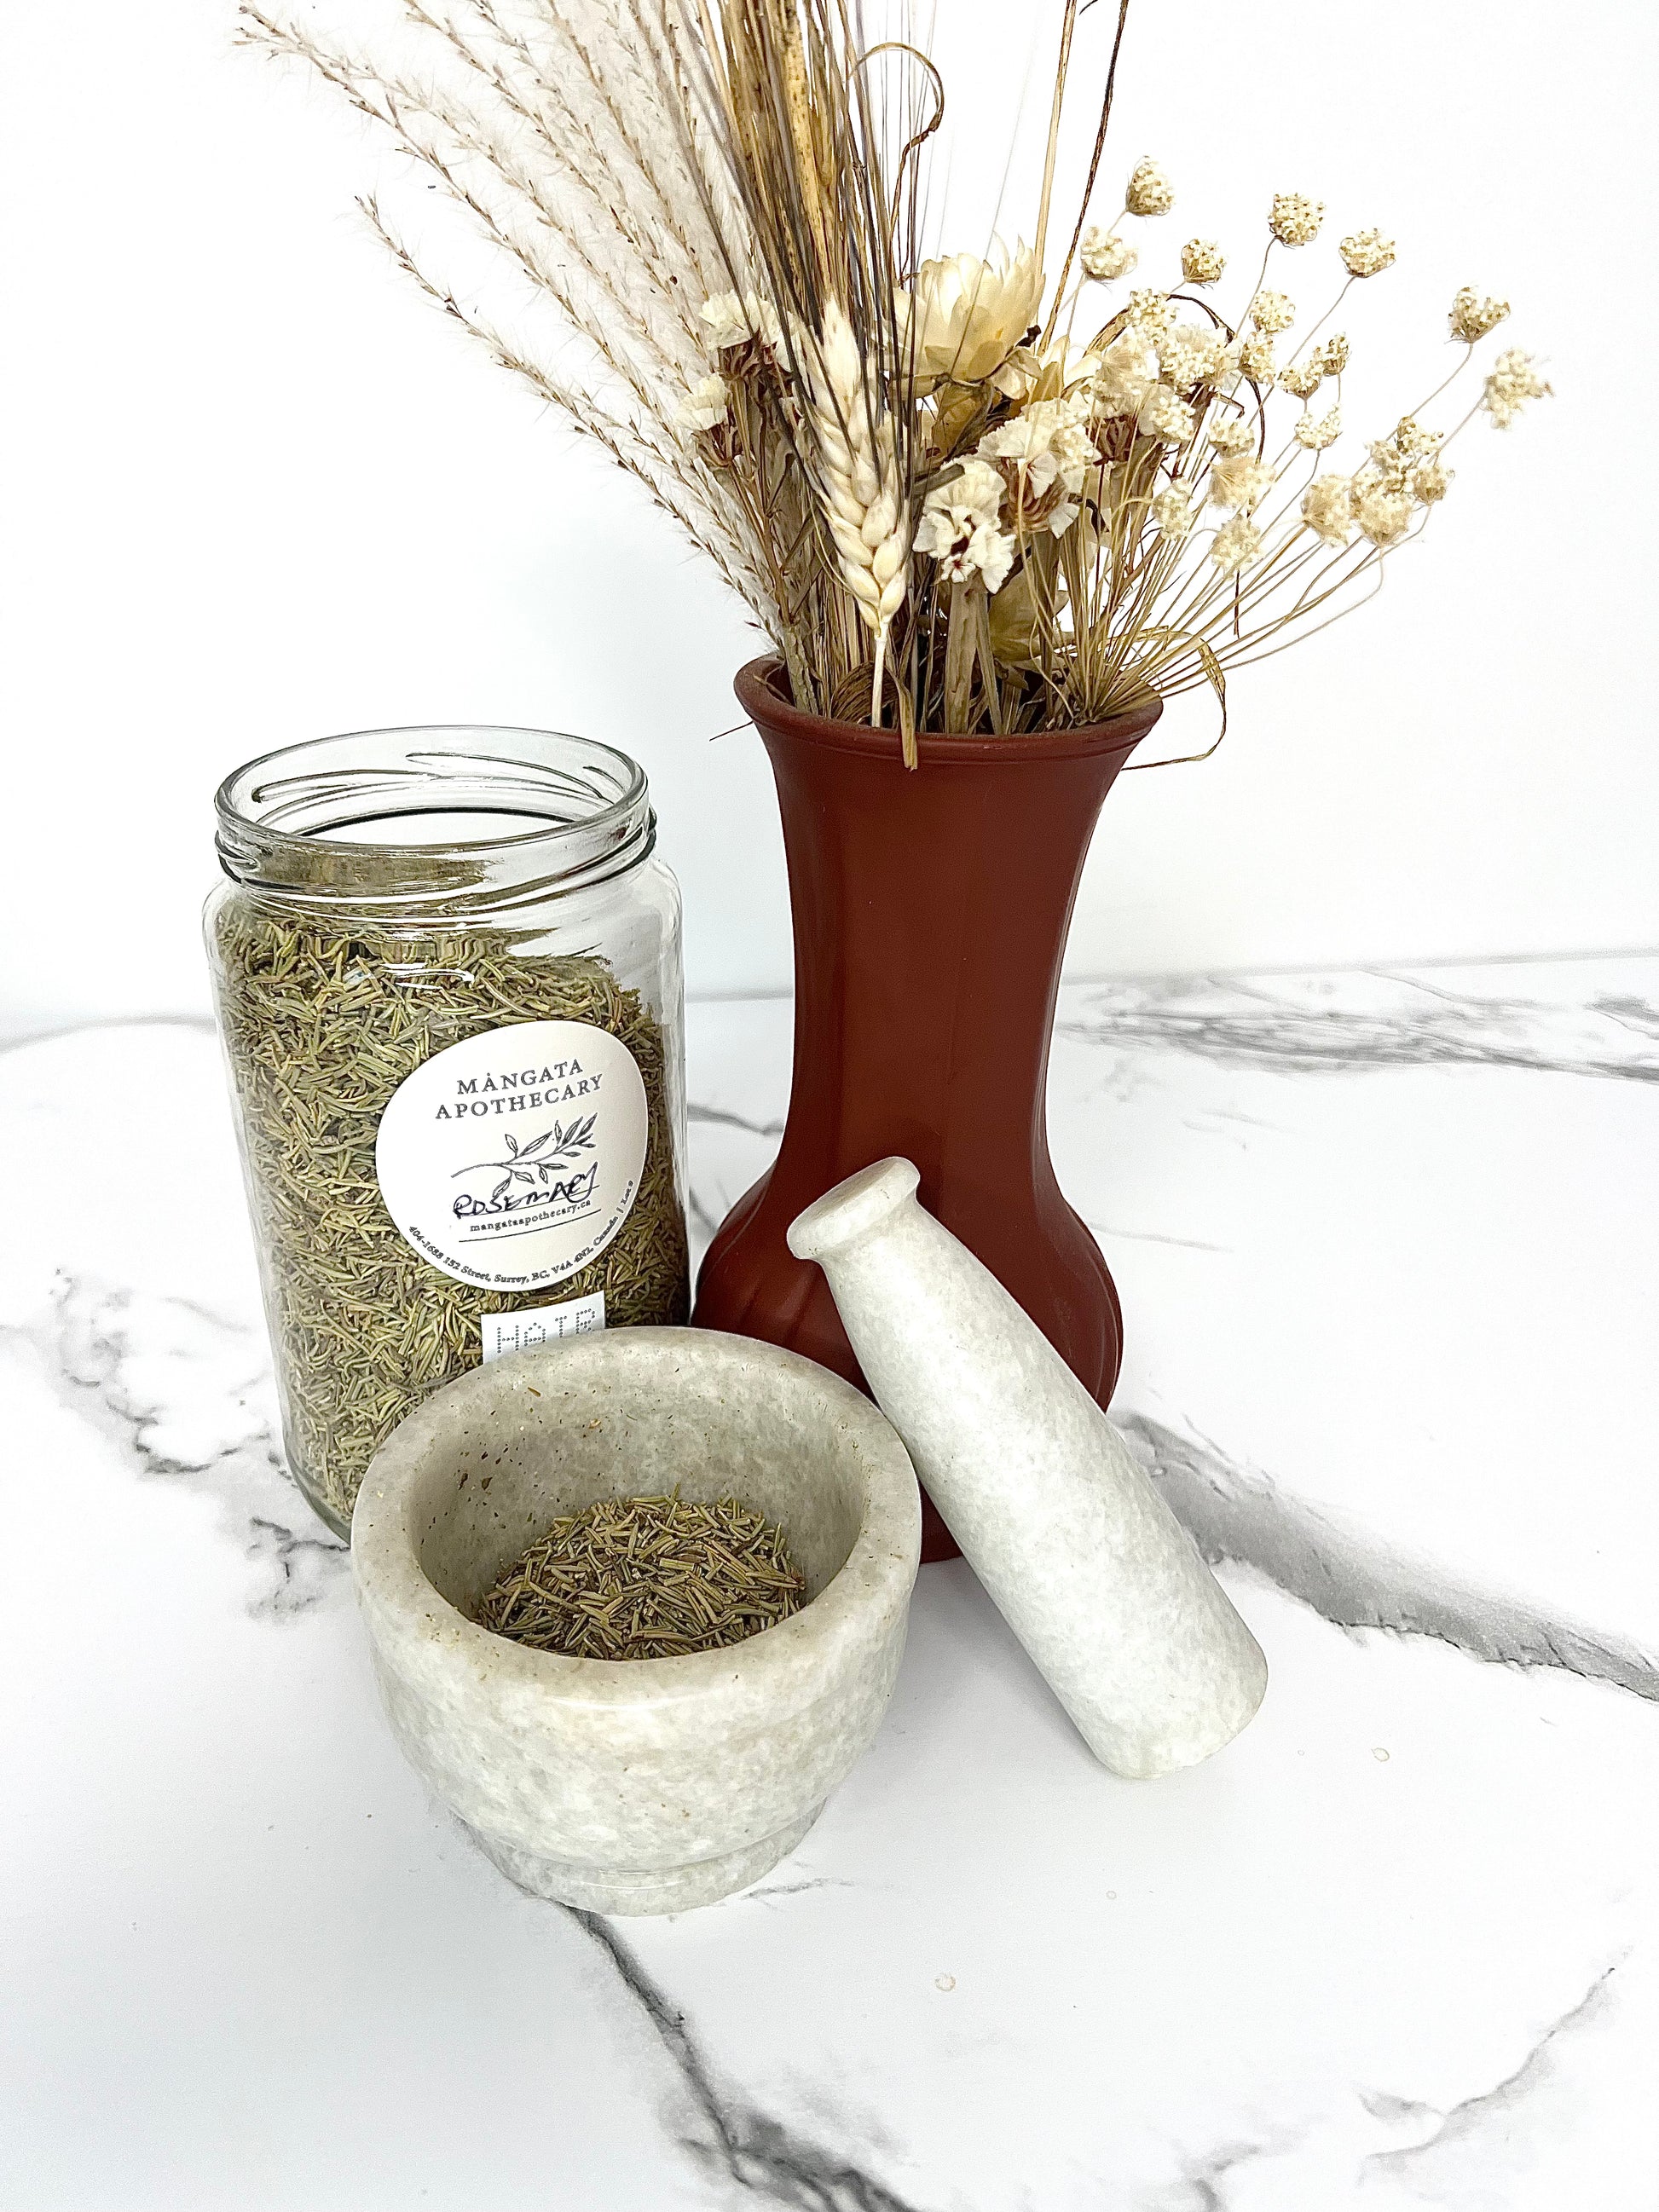 Rosemary Herb - Product Image For Mangata Dispensary